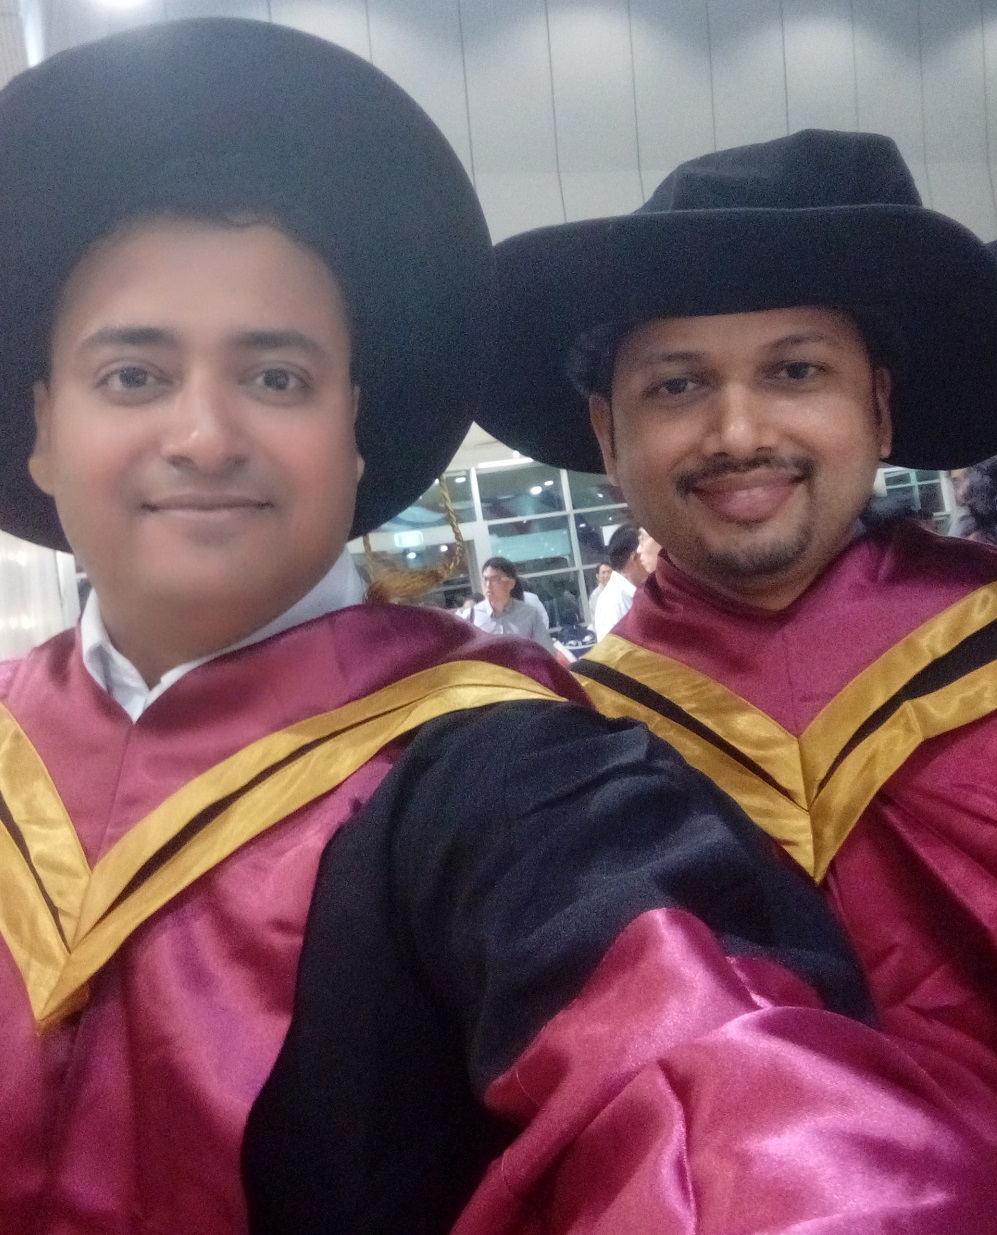 The PhD convocation day – a remarkable day in a research scholar’s life. A PhD degree can help you in a specialized job search and enriched career direction.